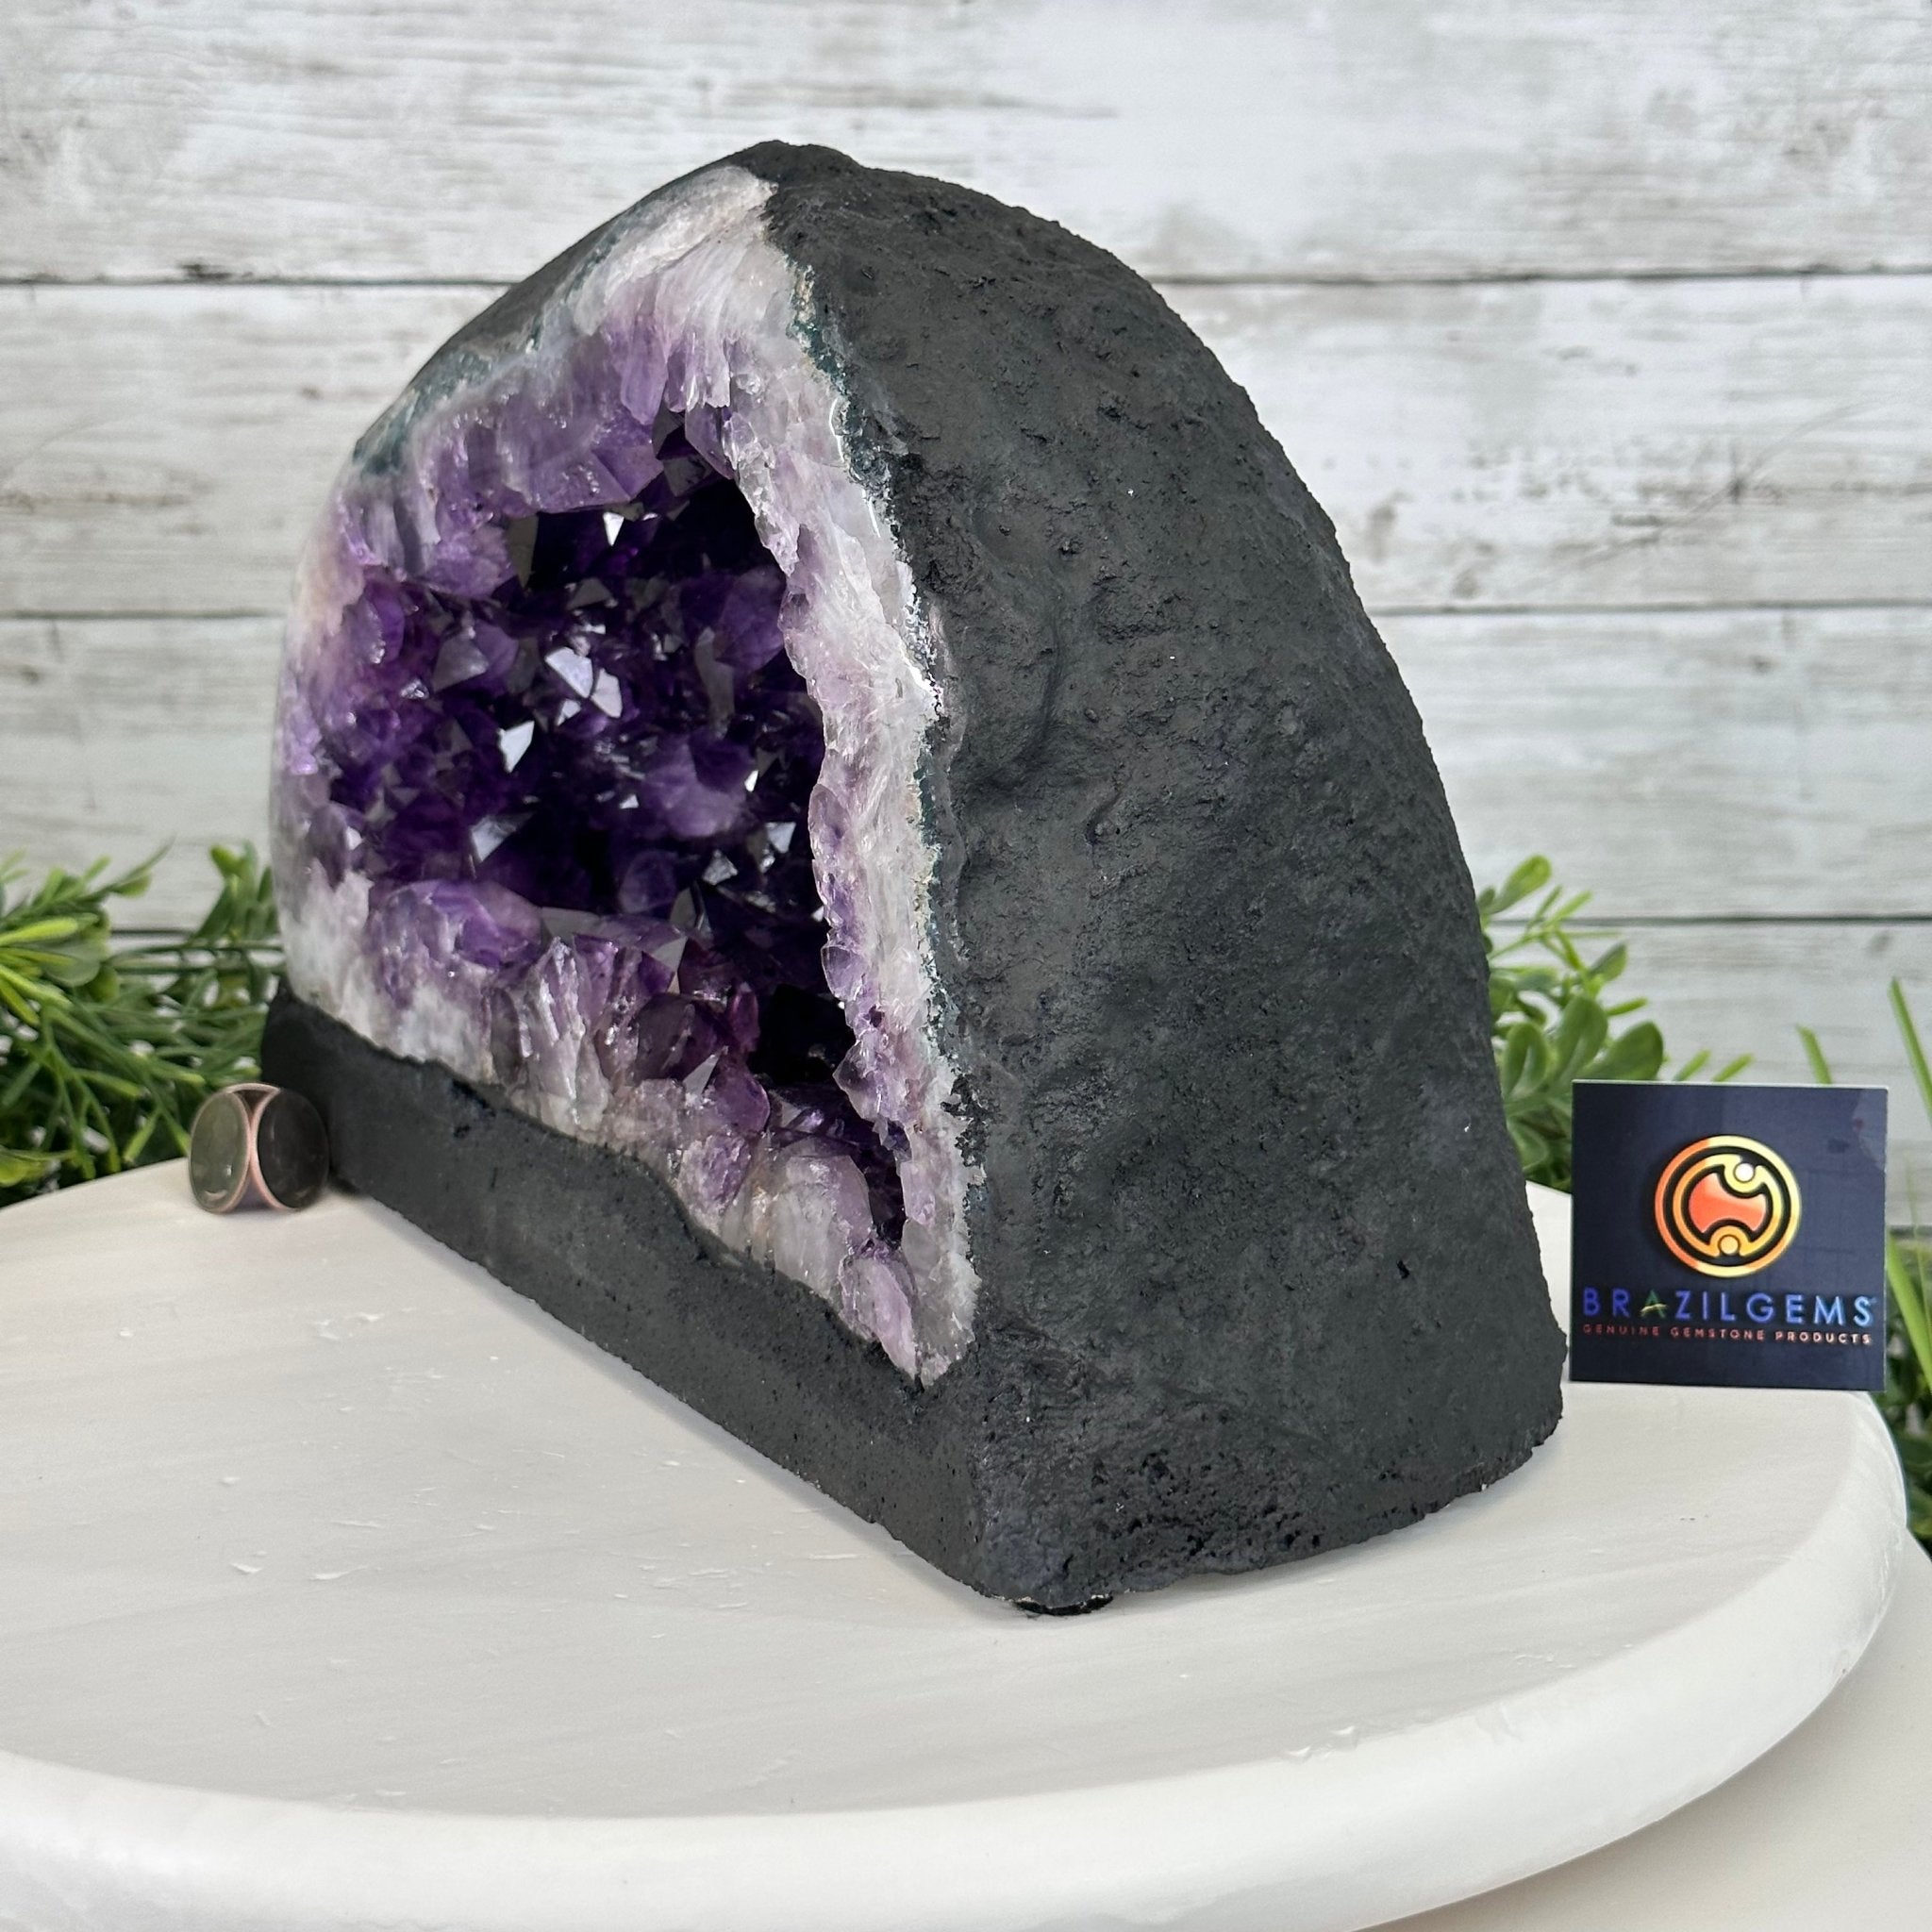 Extra Plus Quality Brazilian Amethyst Cathedral, 21.2 lbs & 8" Tall, Model #5601-1282 by Brazil Gems - Brazil GemsBrazil GemsExtra Plus Quality Brazilian Amethyst Cathedral, 21.2 lbs & 8" Tall, Model #5601-1282 by Brazil GemsCathedrals5601-1282